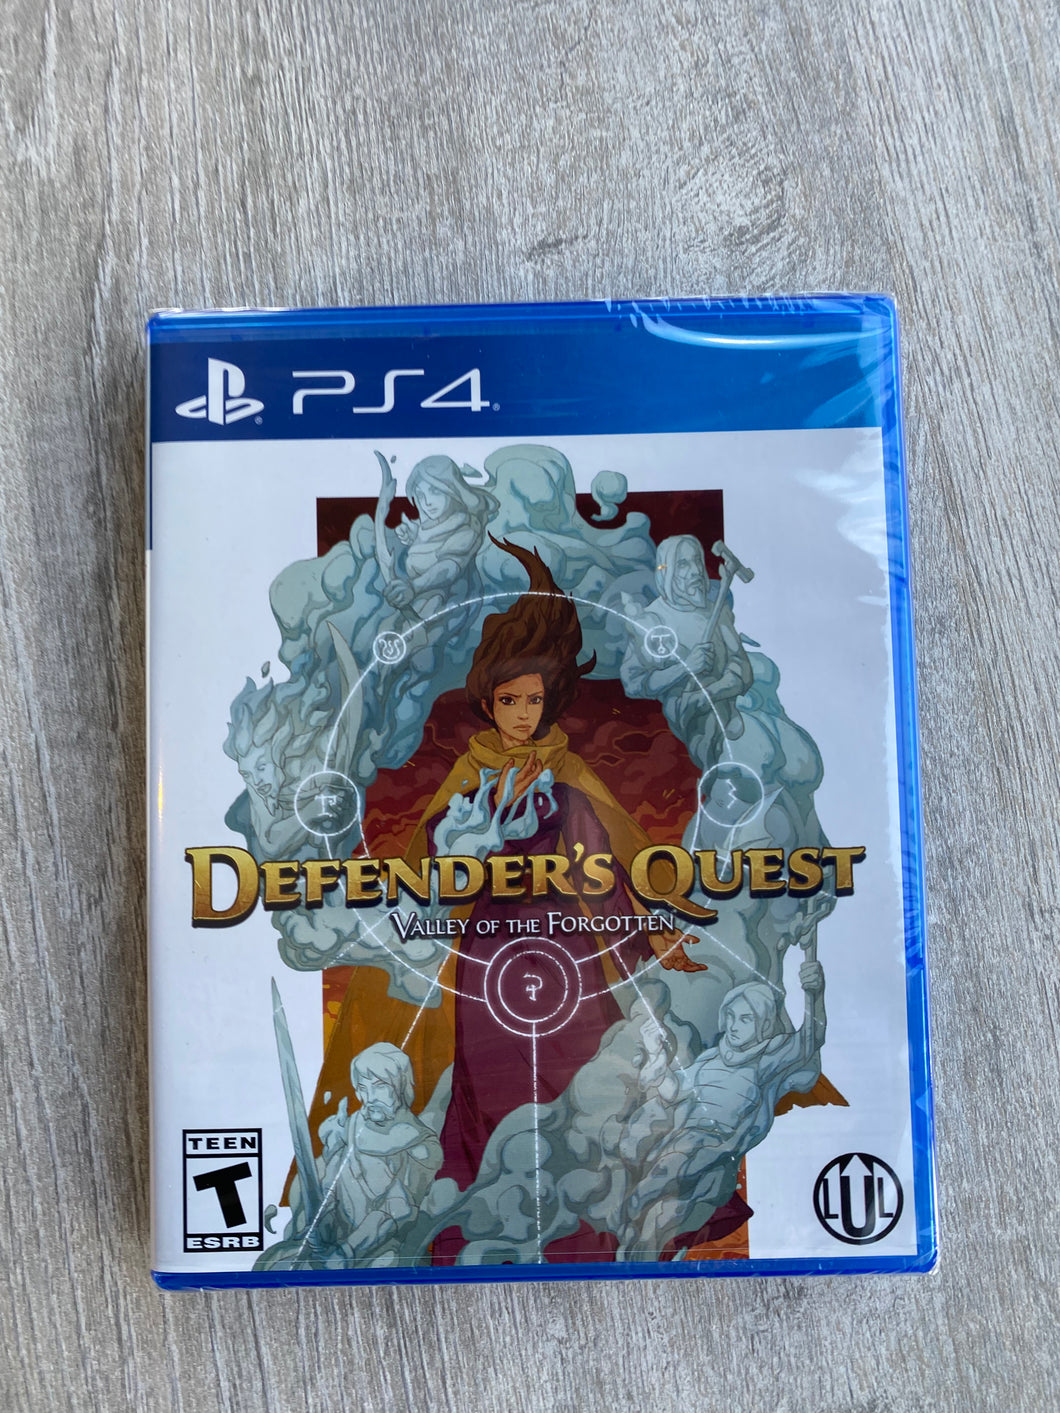 Defender’s quest / Limited run games / PS4